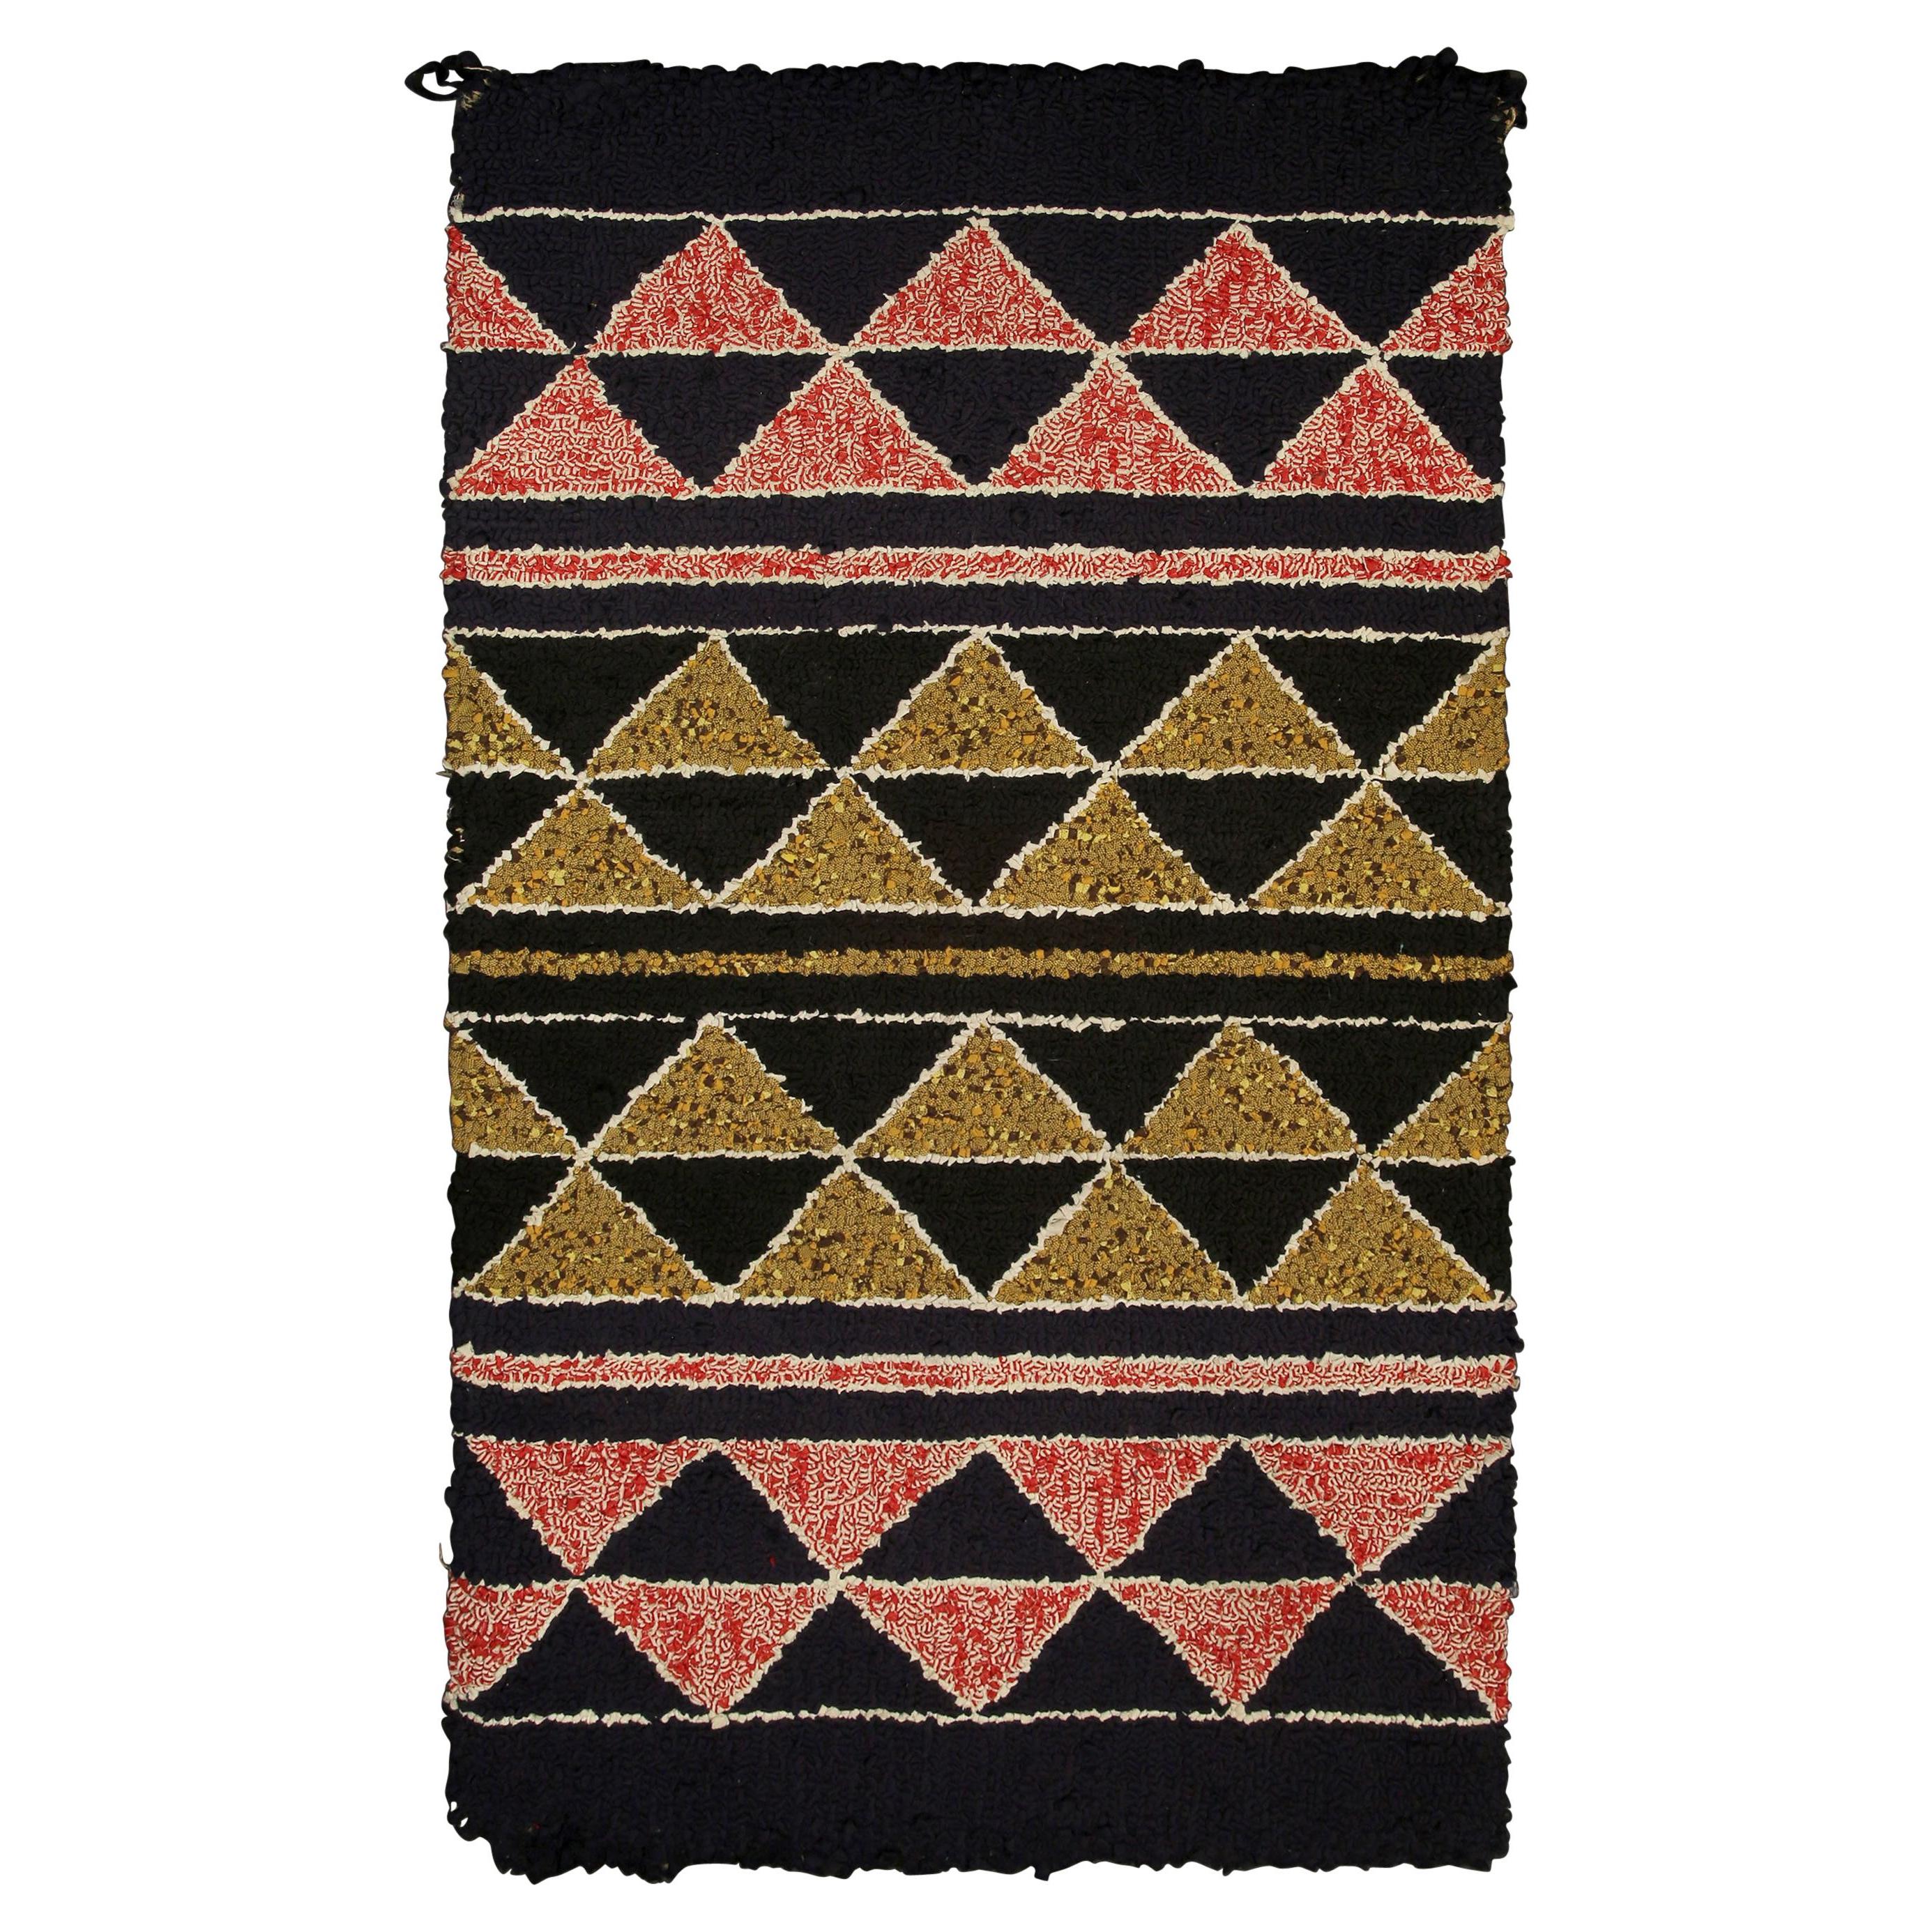 Mid-20th Century American Hooked Rug with Reciprocating Triangle Motif For Sale